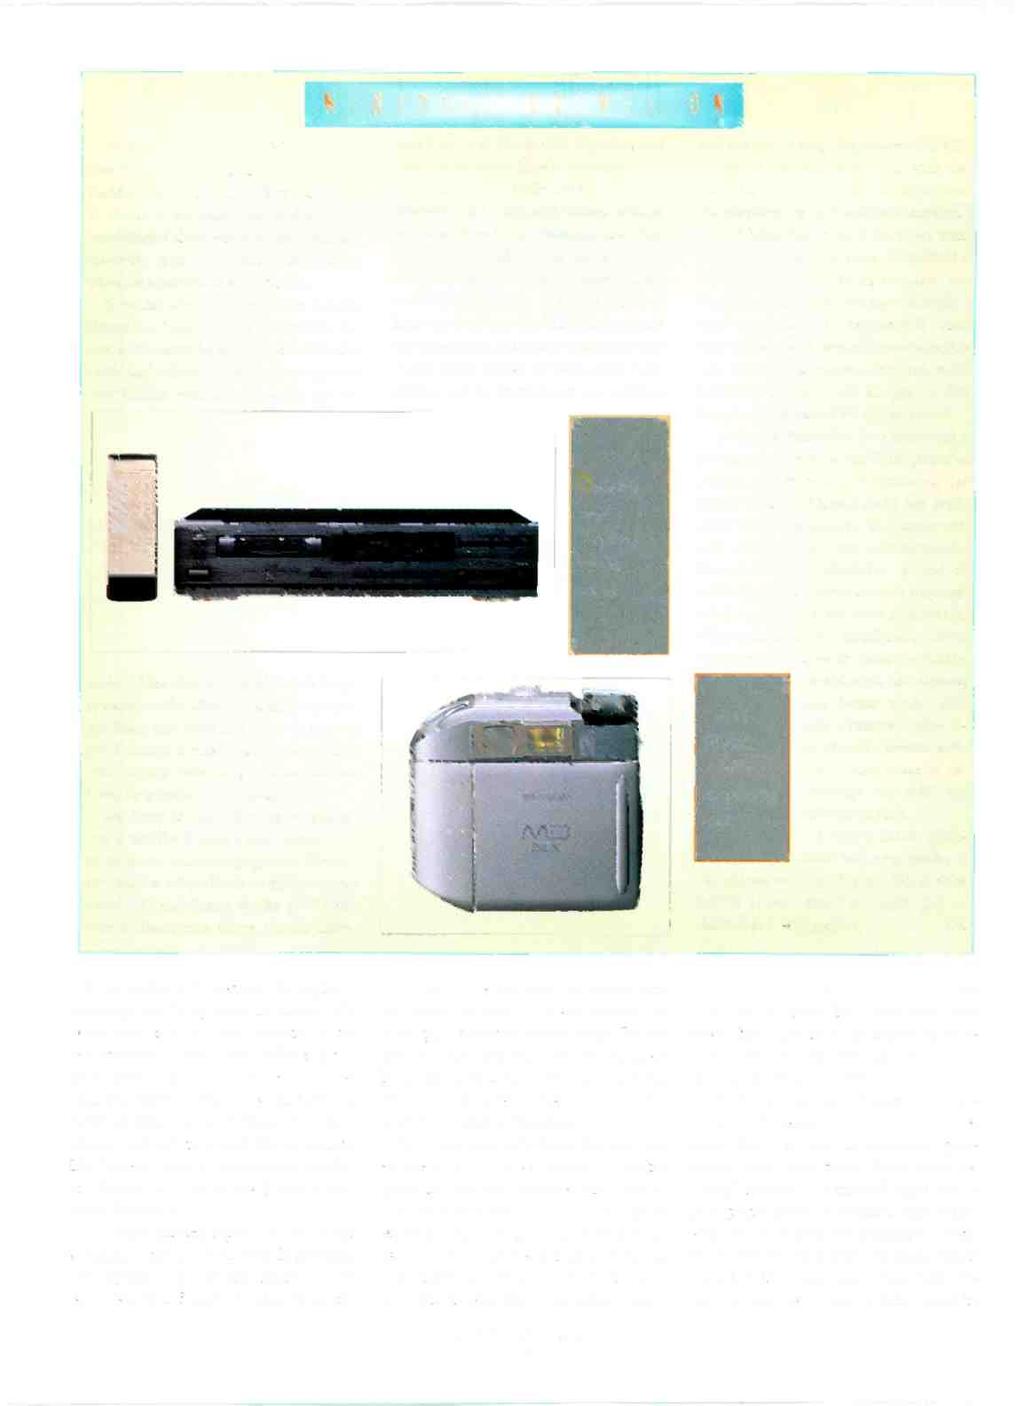 When the MiniDisc (MD) format was first announced, the obvious comparison was with DCC. They came out at virtually the same time, and both offered digital alternatives to the Compact Cassette.